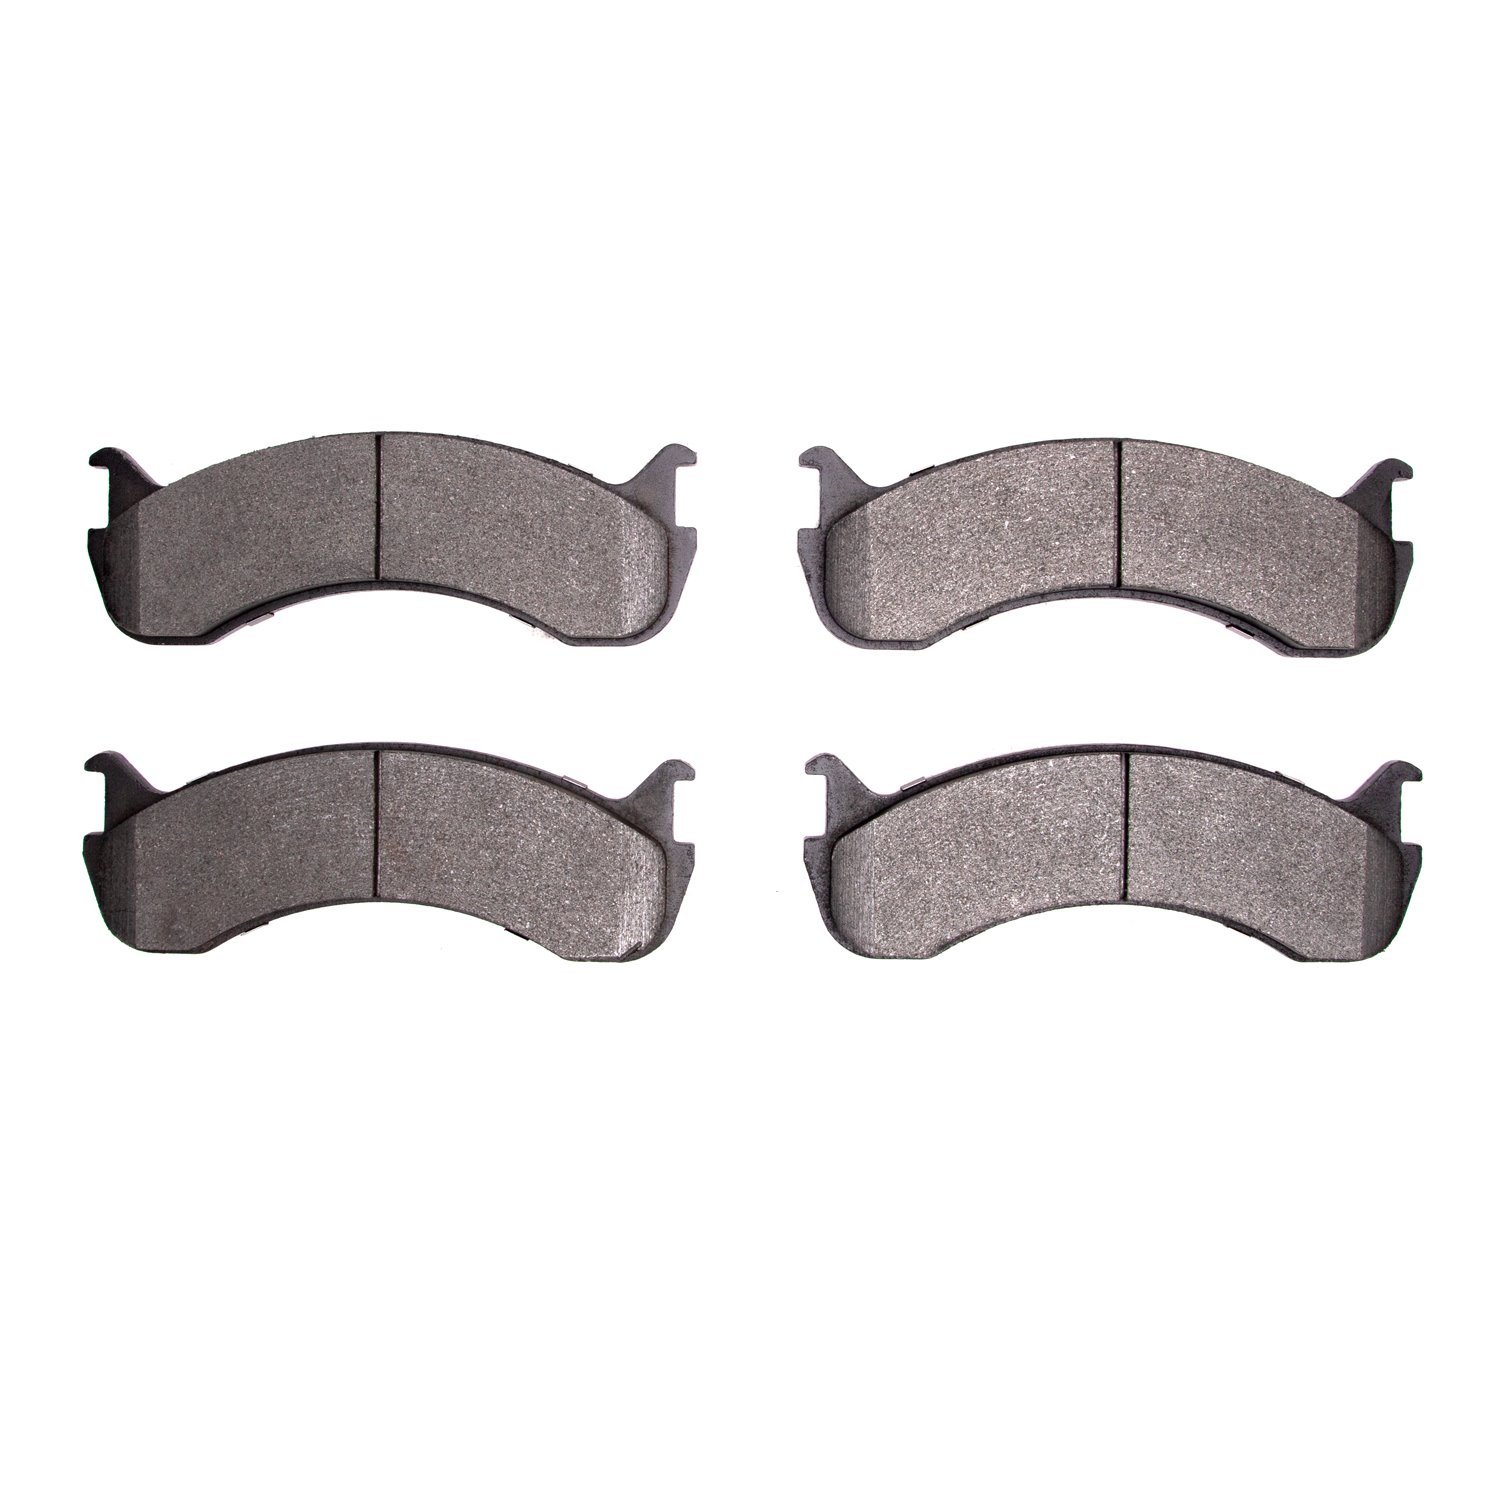 Optimum OE Brake Pads, Fits Select Fits Multiple Makes/Models, Position: Front & Rear